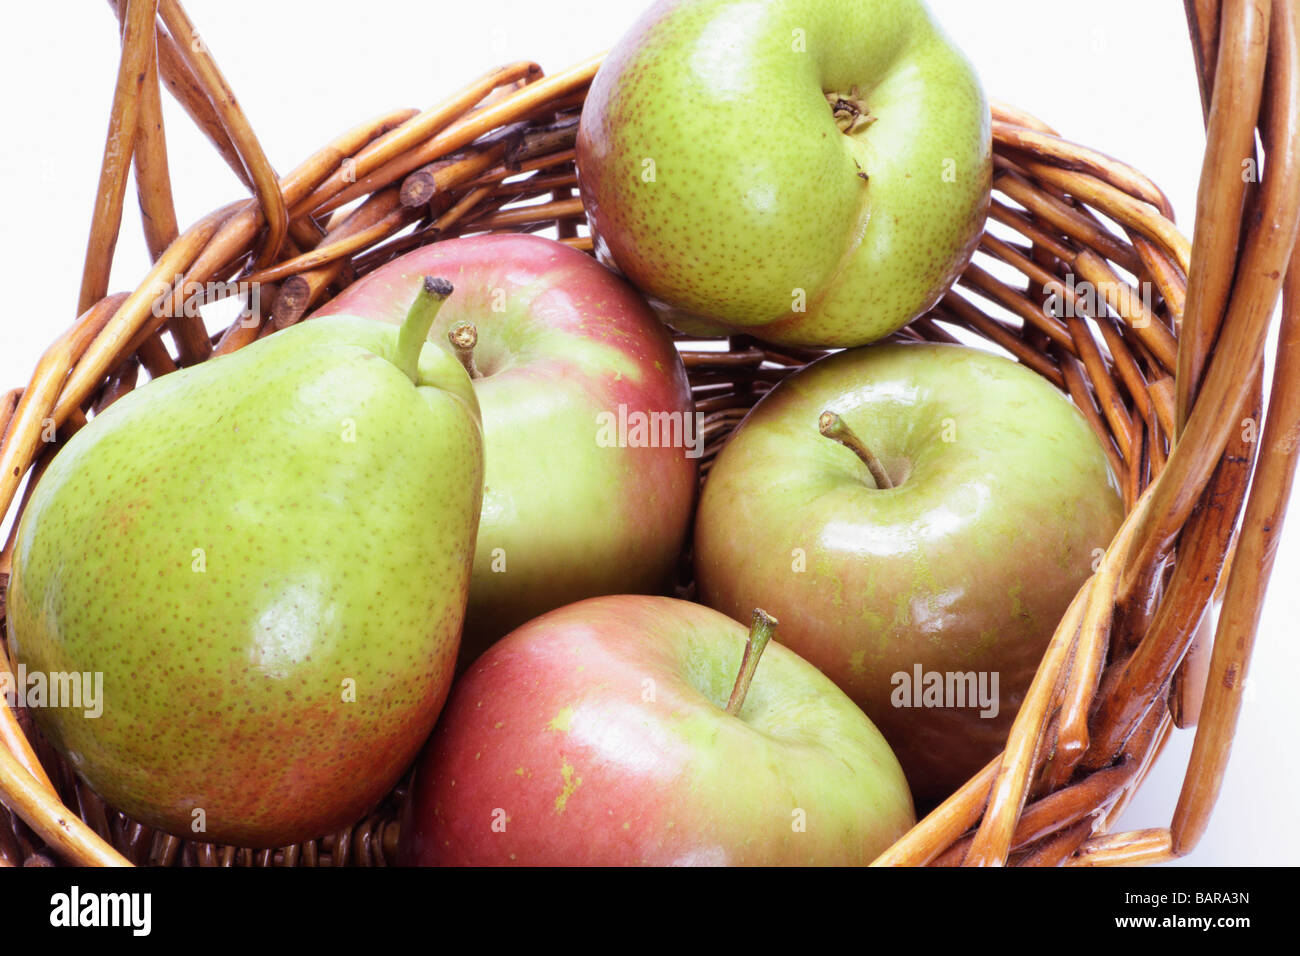 Fruits in Basket Stock Photo